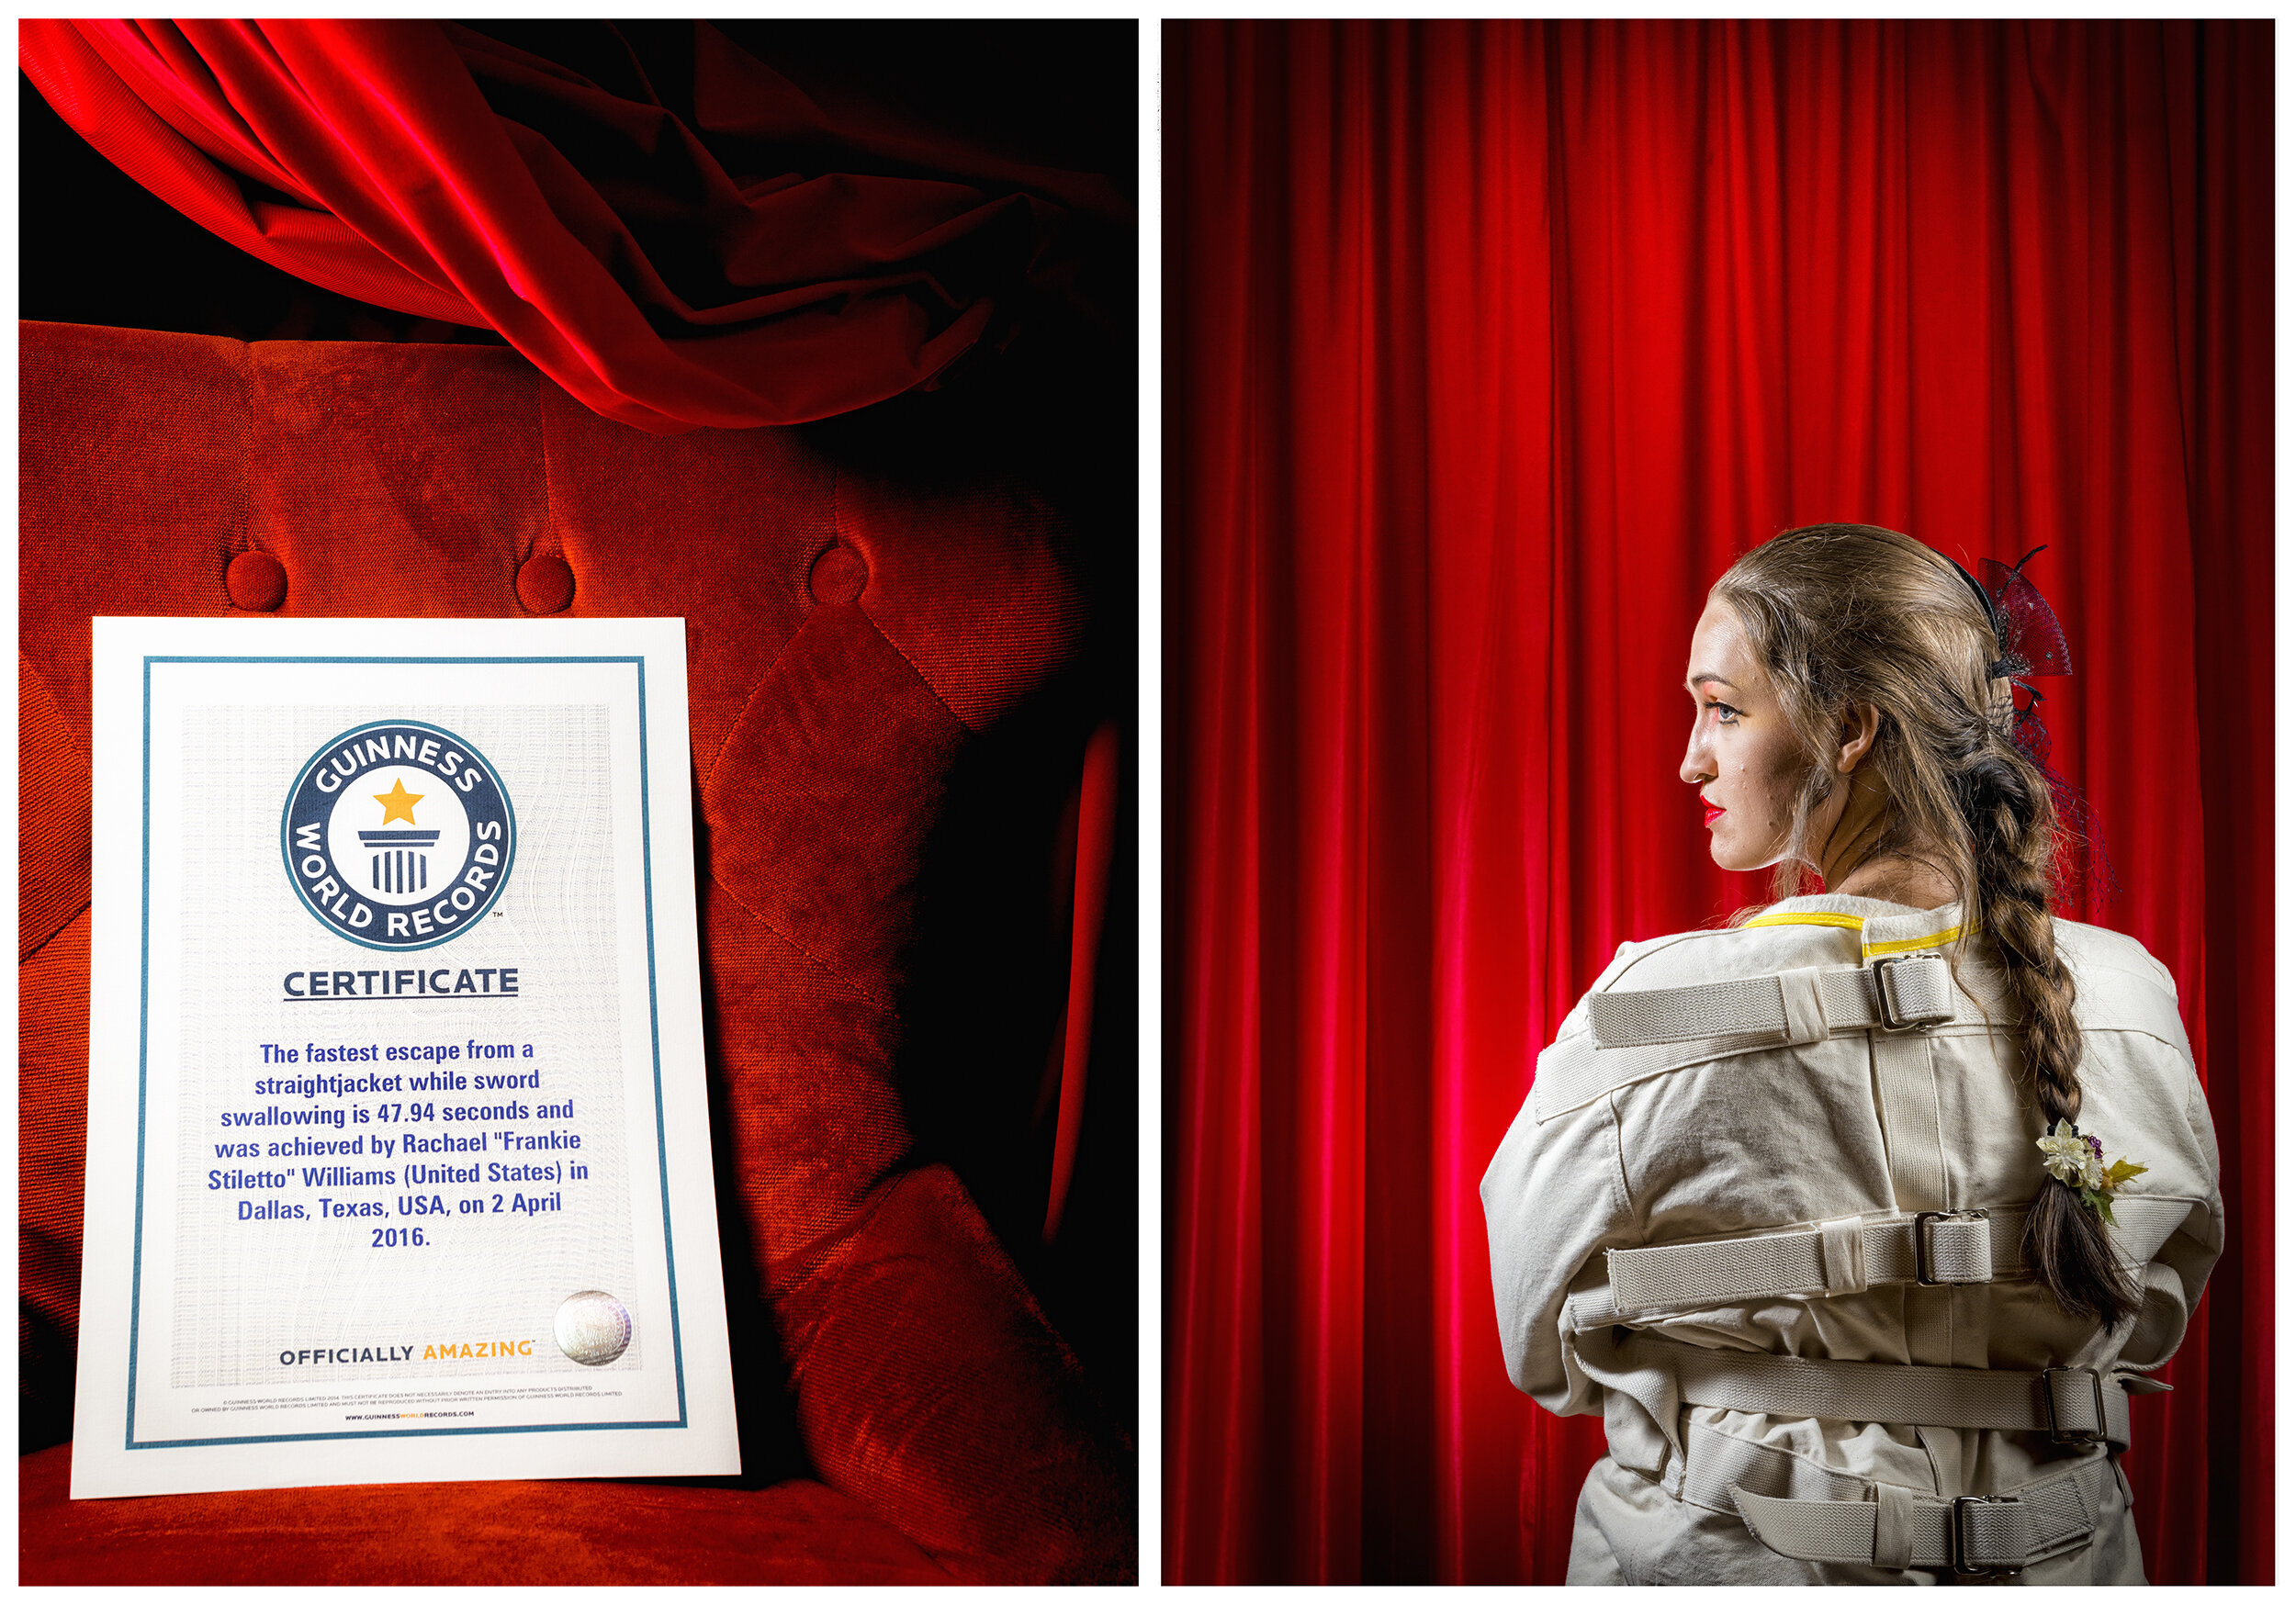  Rachael Williams, aka Frankie Stiletto, poses for a portrait while wearing a straight jacket in Dallas, TX.  In April 2016, Williams earned a Guinness World Records certificate for her “fastest escape from a straight jacket while sword swallowing in